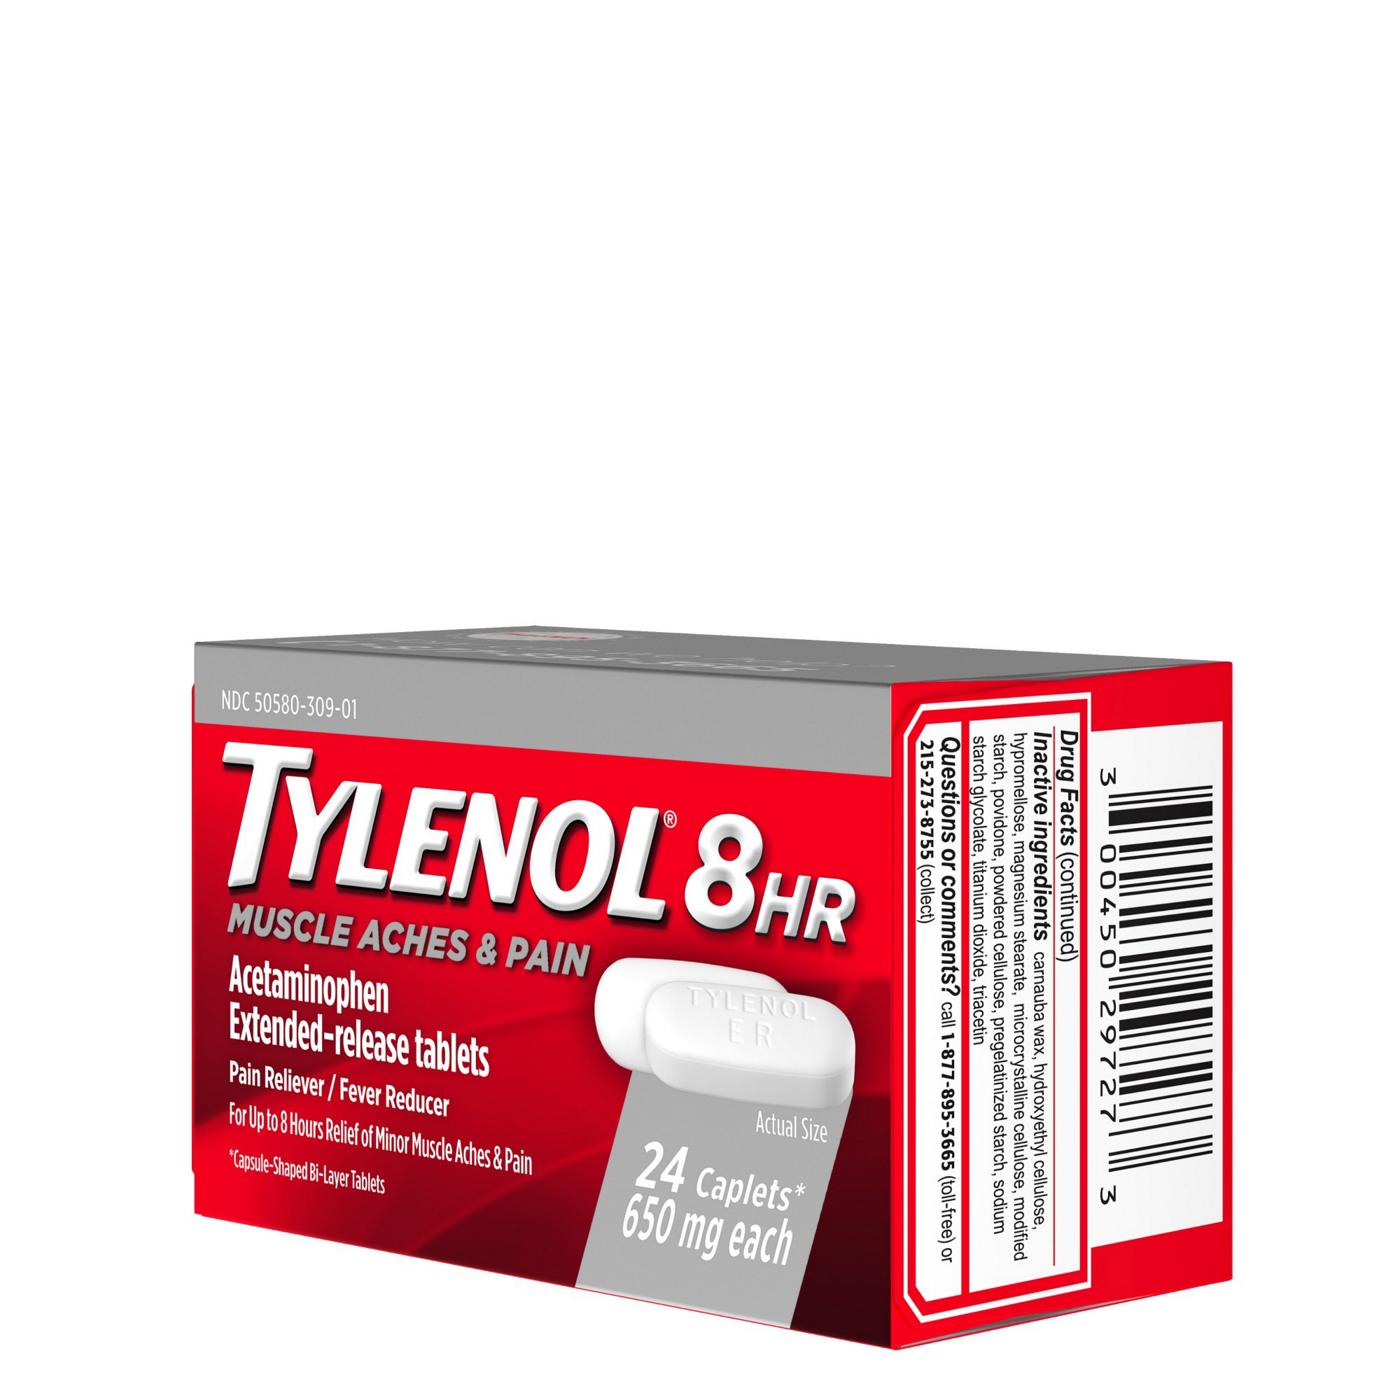 Tylenol 8 HR Muscle Aches & Pains - 650 mg; image 4 of 8